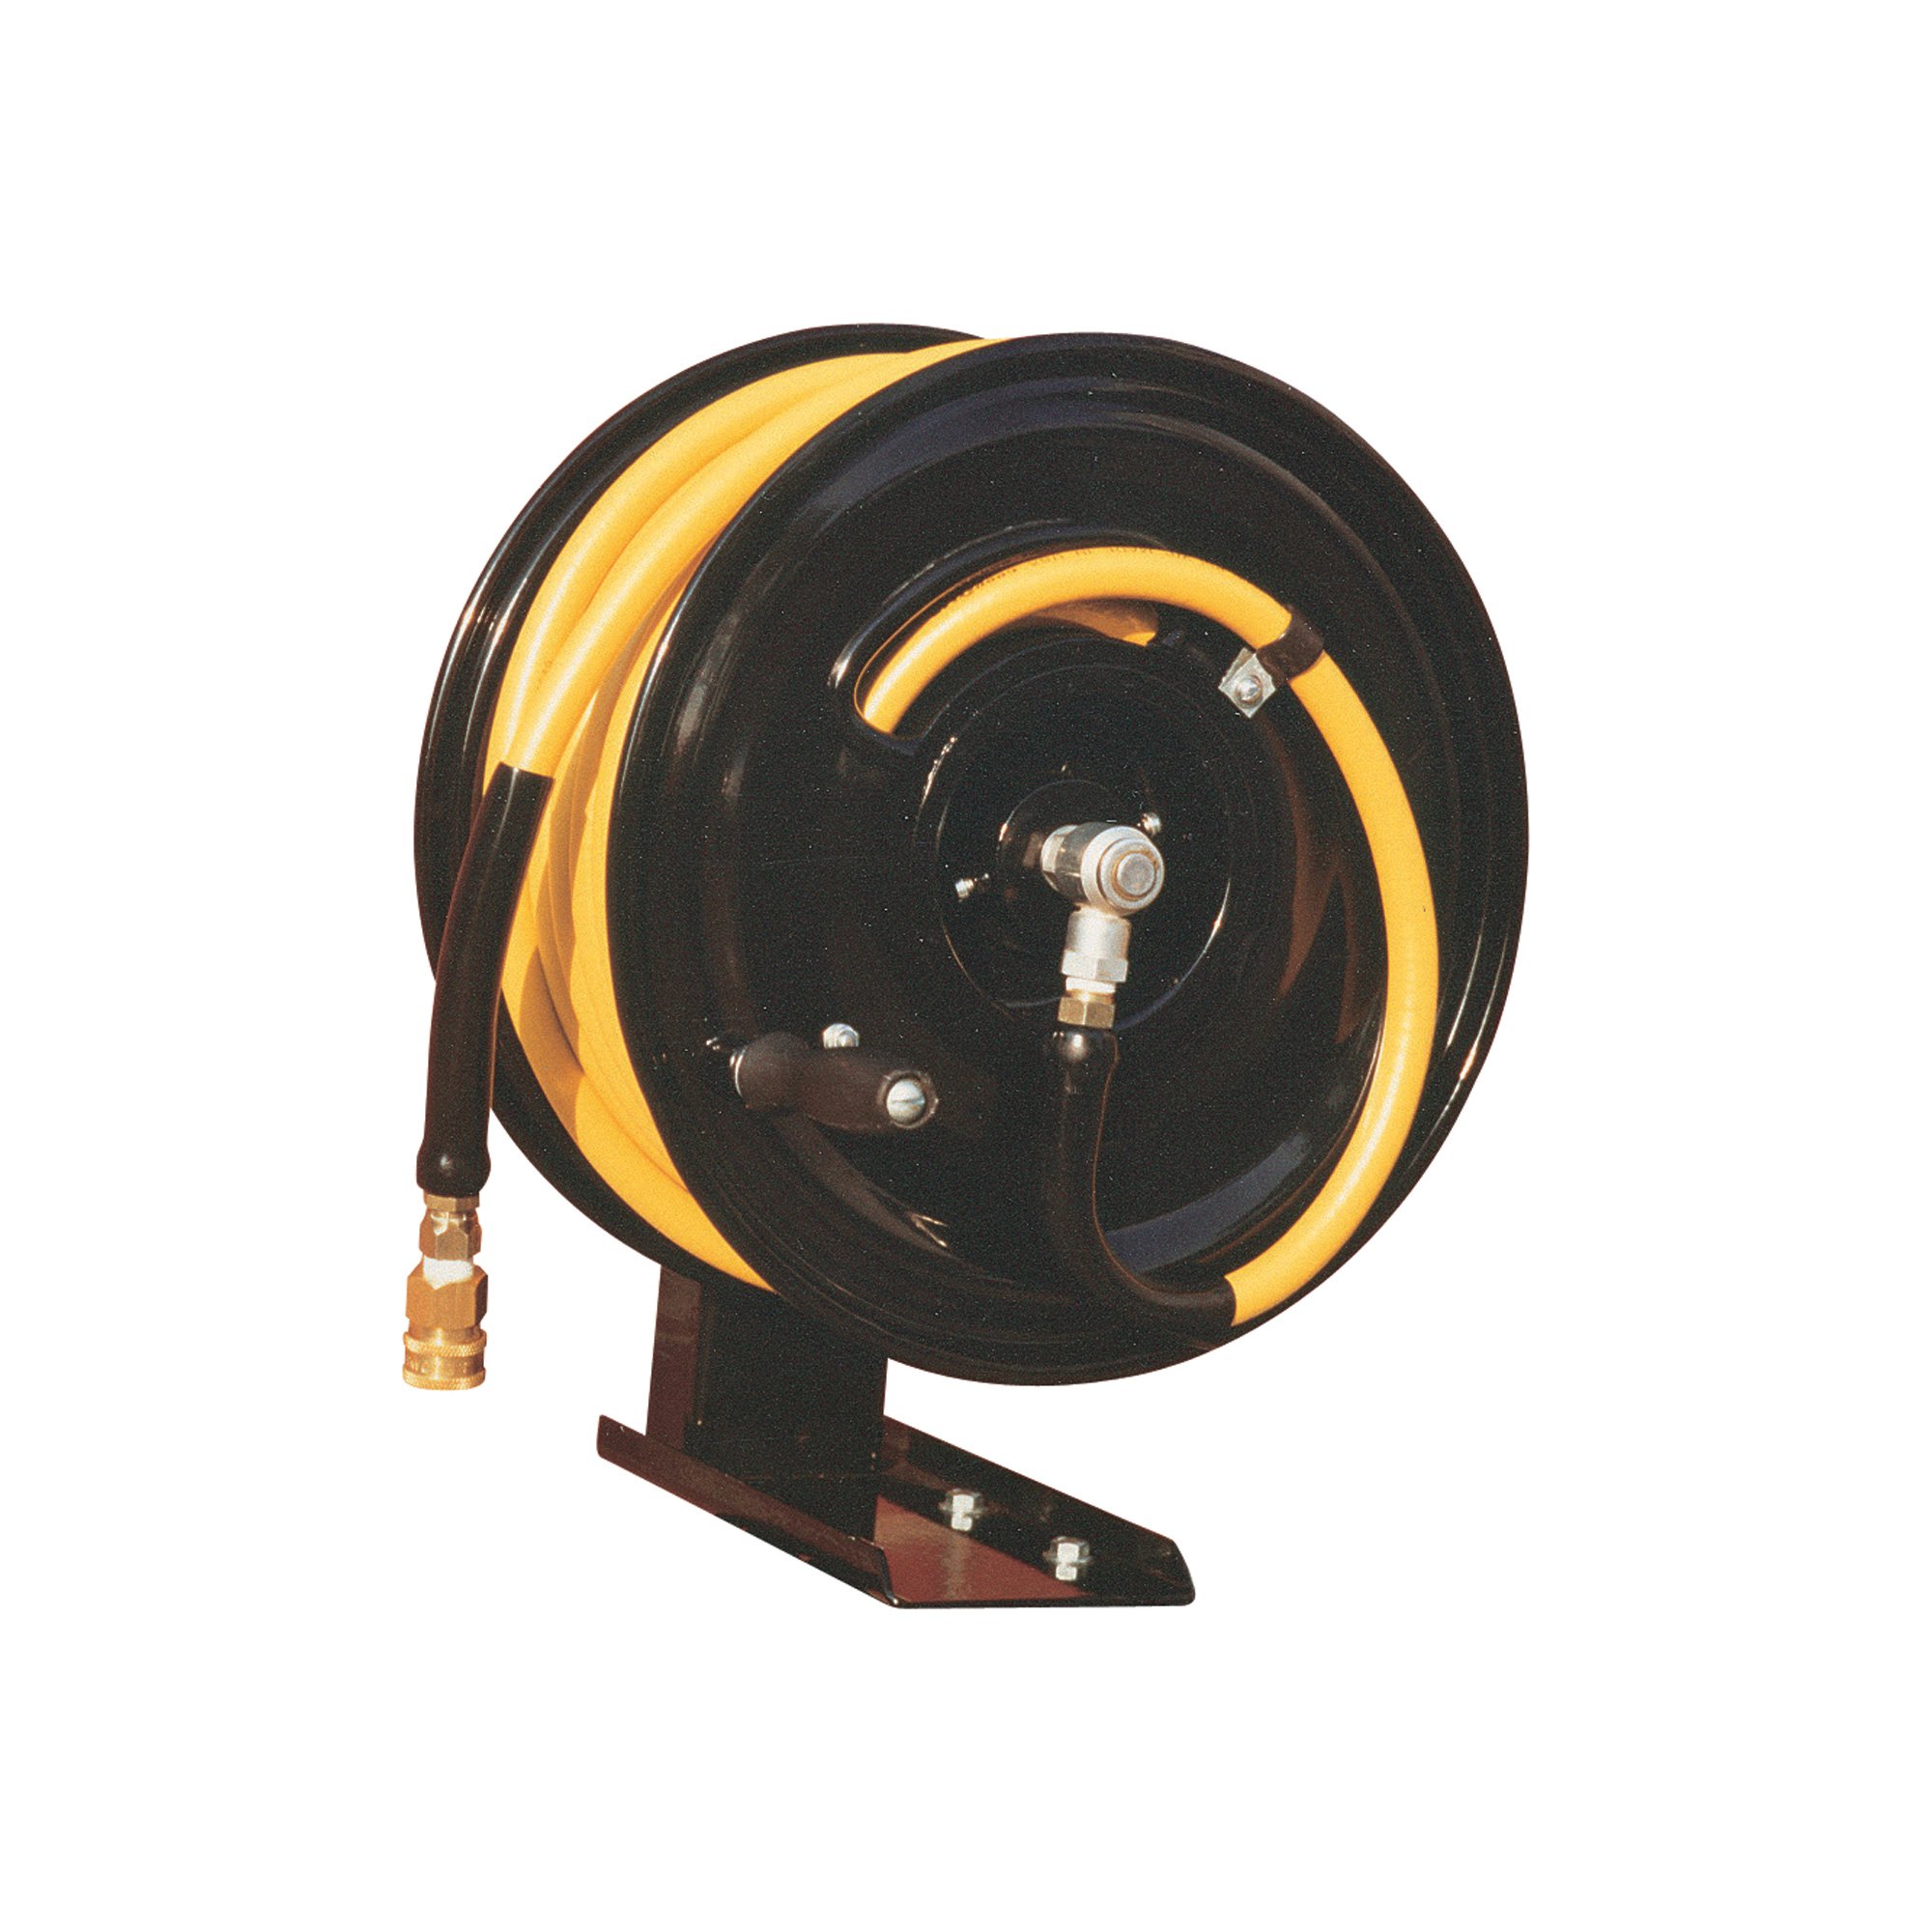 SP Systems Pressure Washer Hose Reel — Holds 3/8in x 150ft. Hose